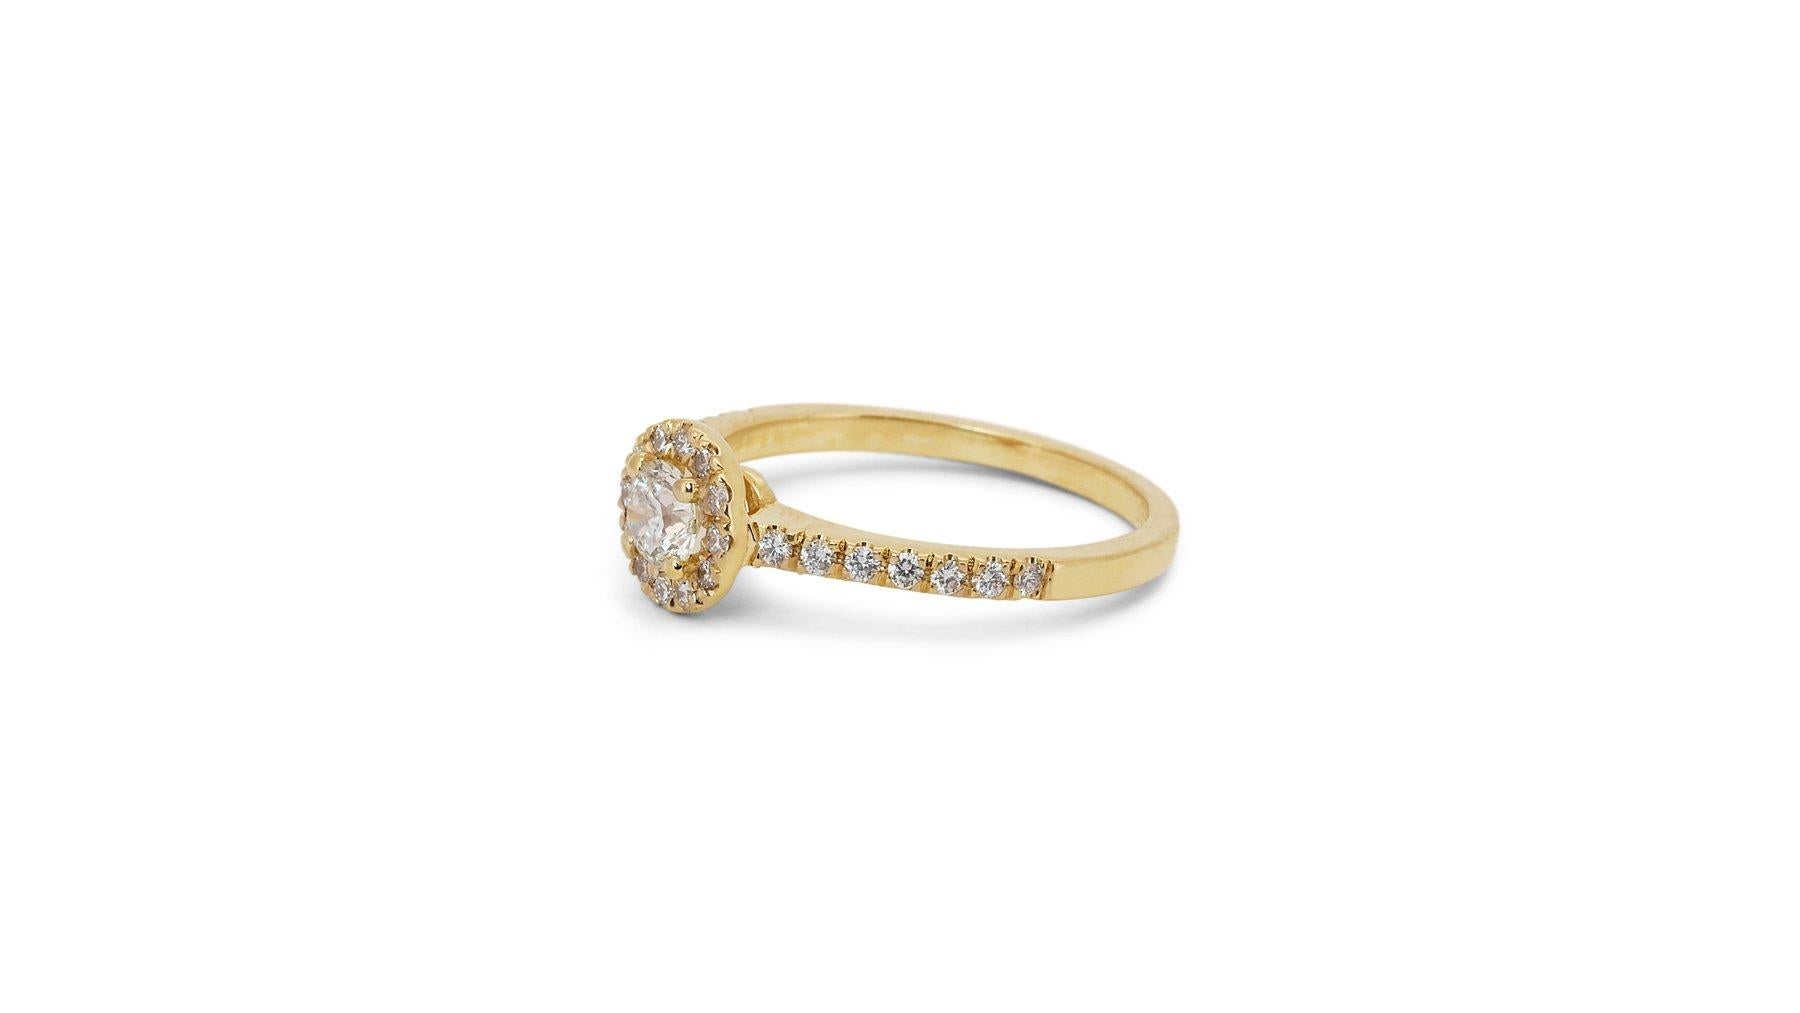 Beautiful 18k Yellow Gold Natural Diamond Halo Ring 1 ct - GIA Certified

This dazzling halo diamond ring embodies classic design and enduring brilliance, featuring a stunning 0.70 carat round diamond center stone nestled within a 26 sparkling